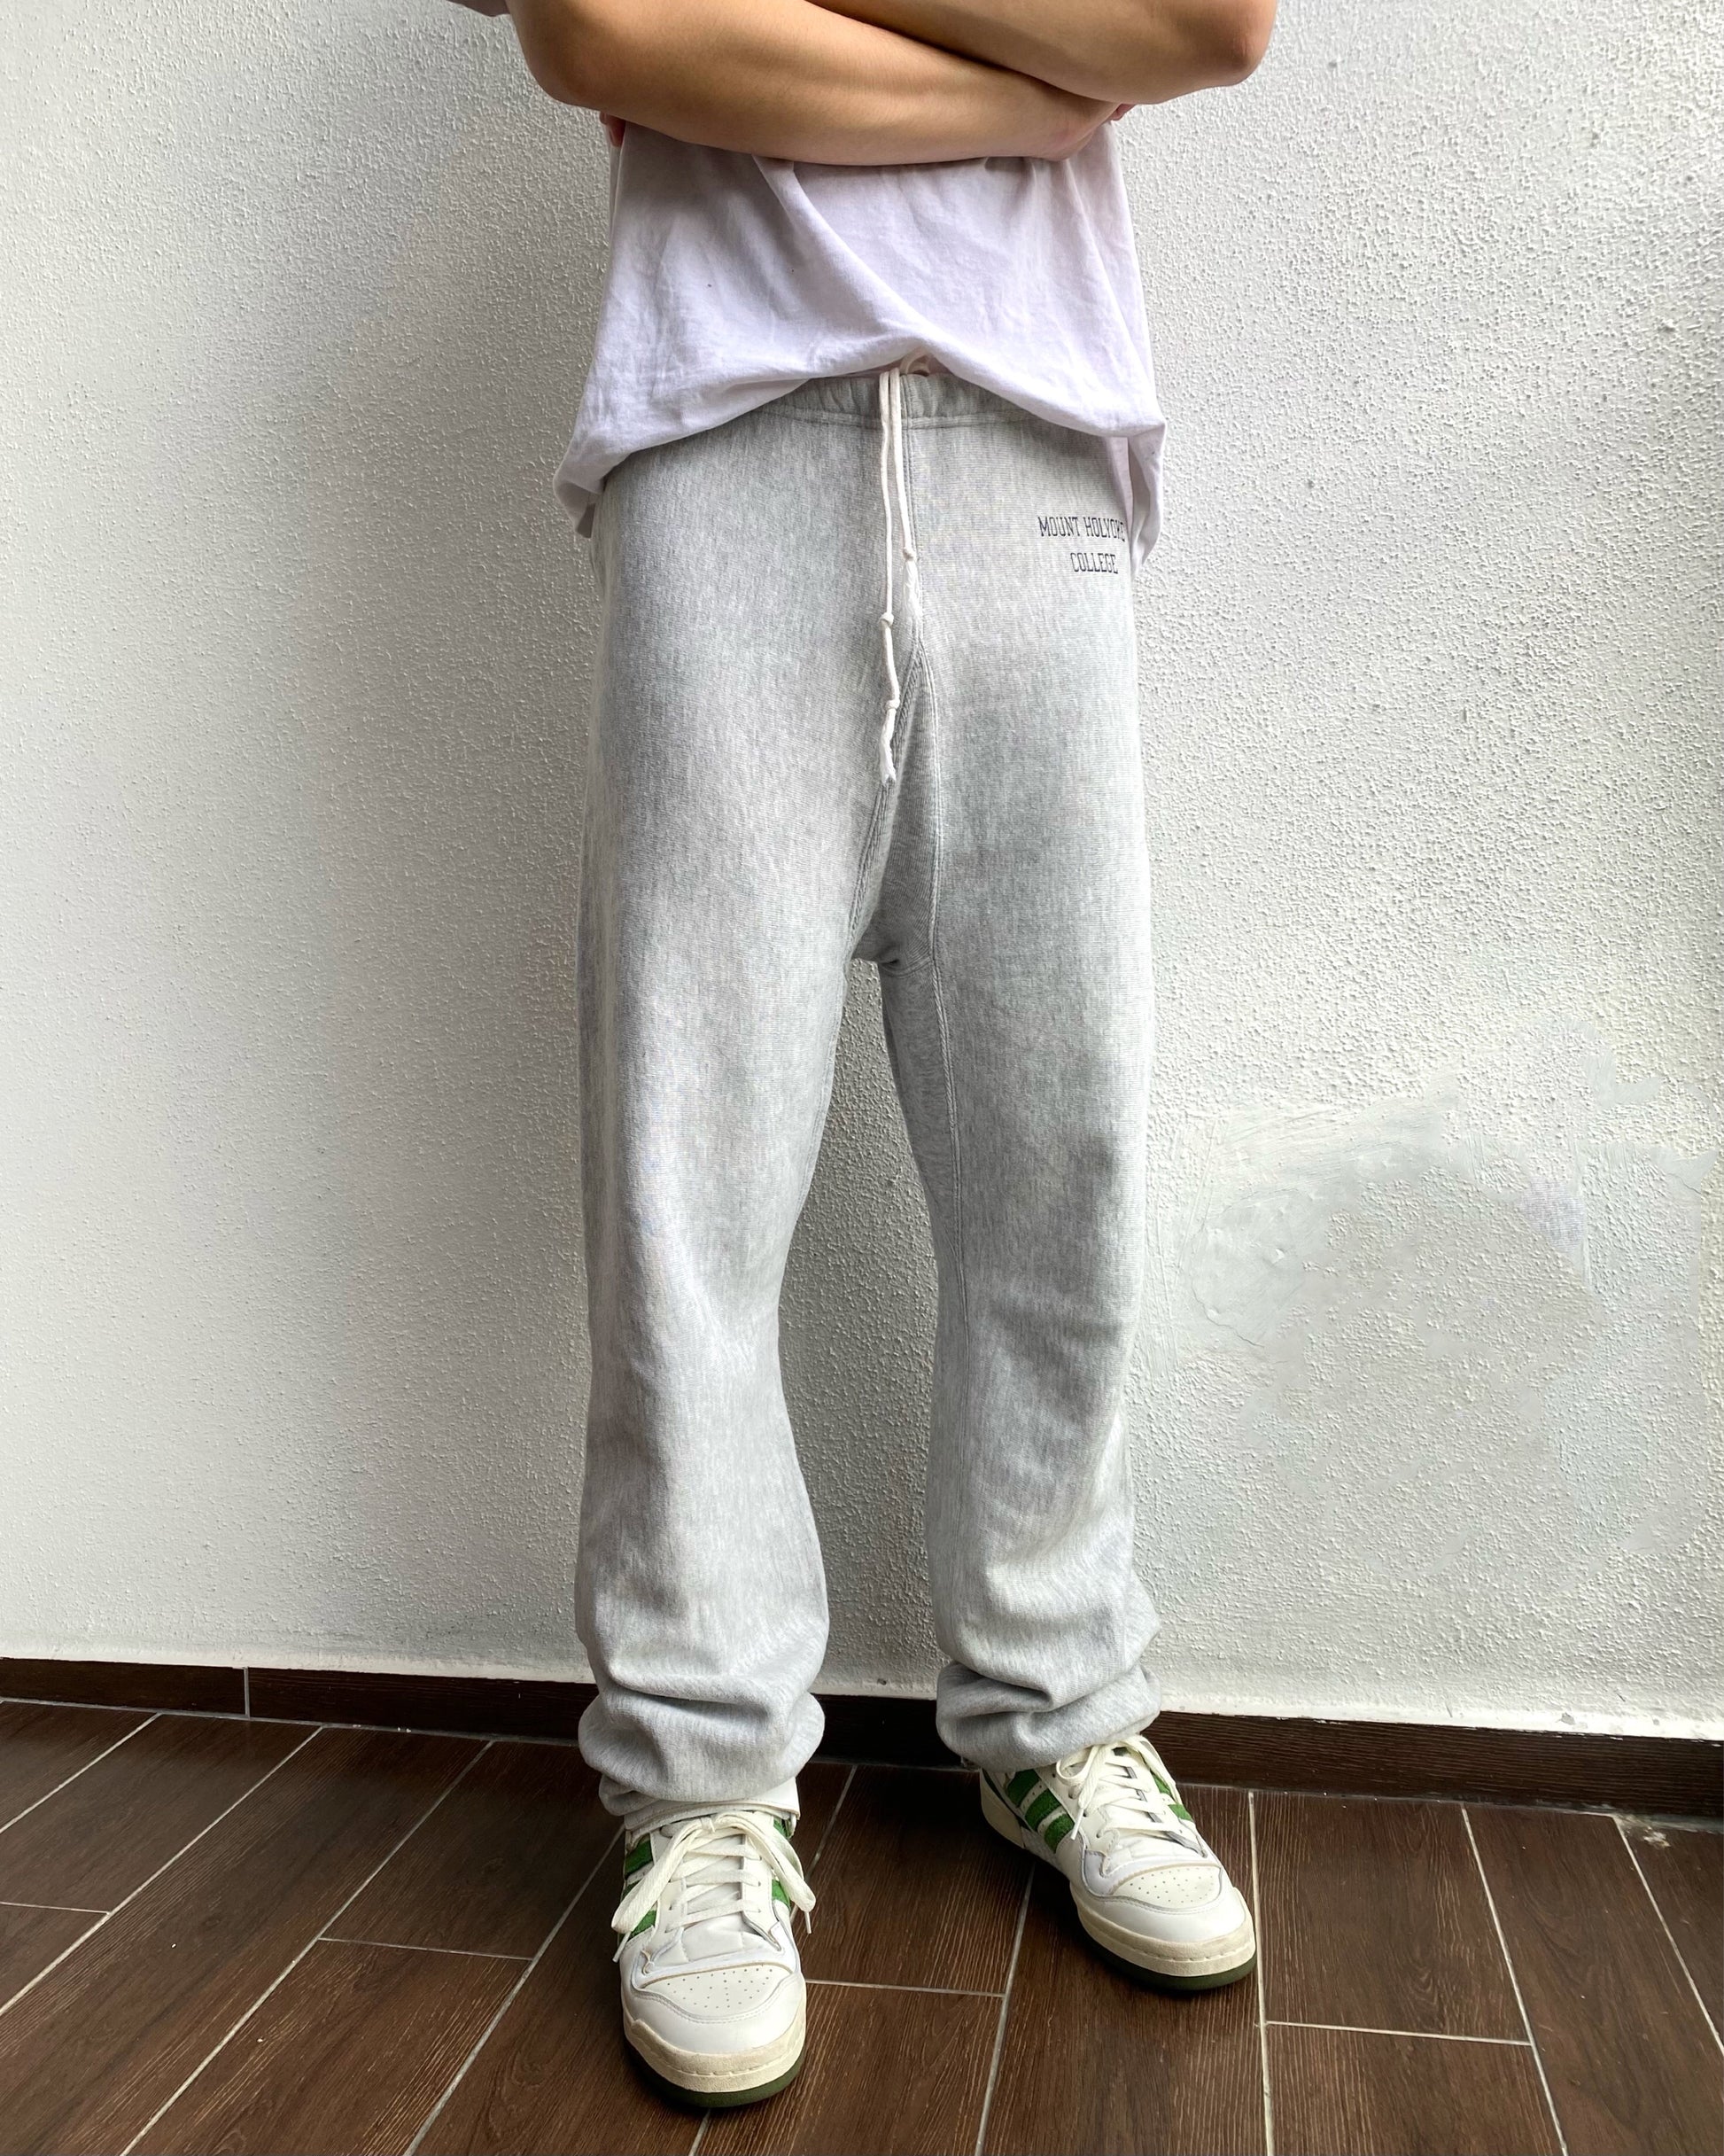 2000S CHAMPION 'STOP LOOKING AT MY DICK' SWEATPANTS (26-34) – exaghules